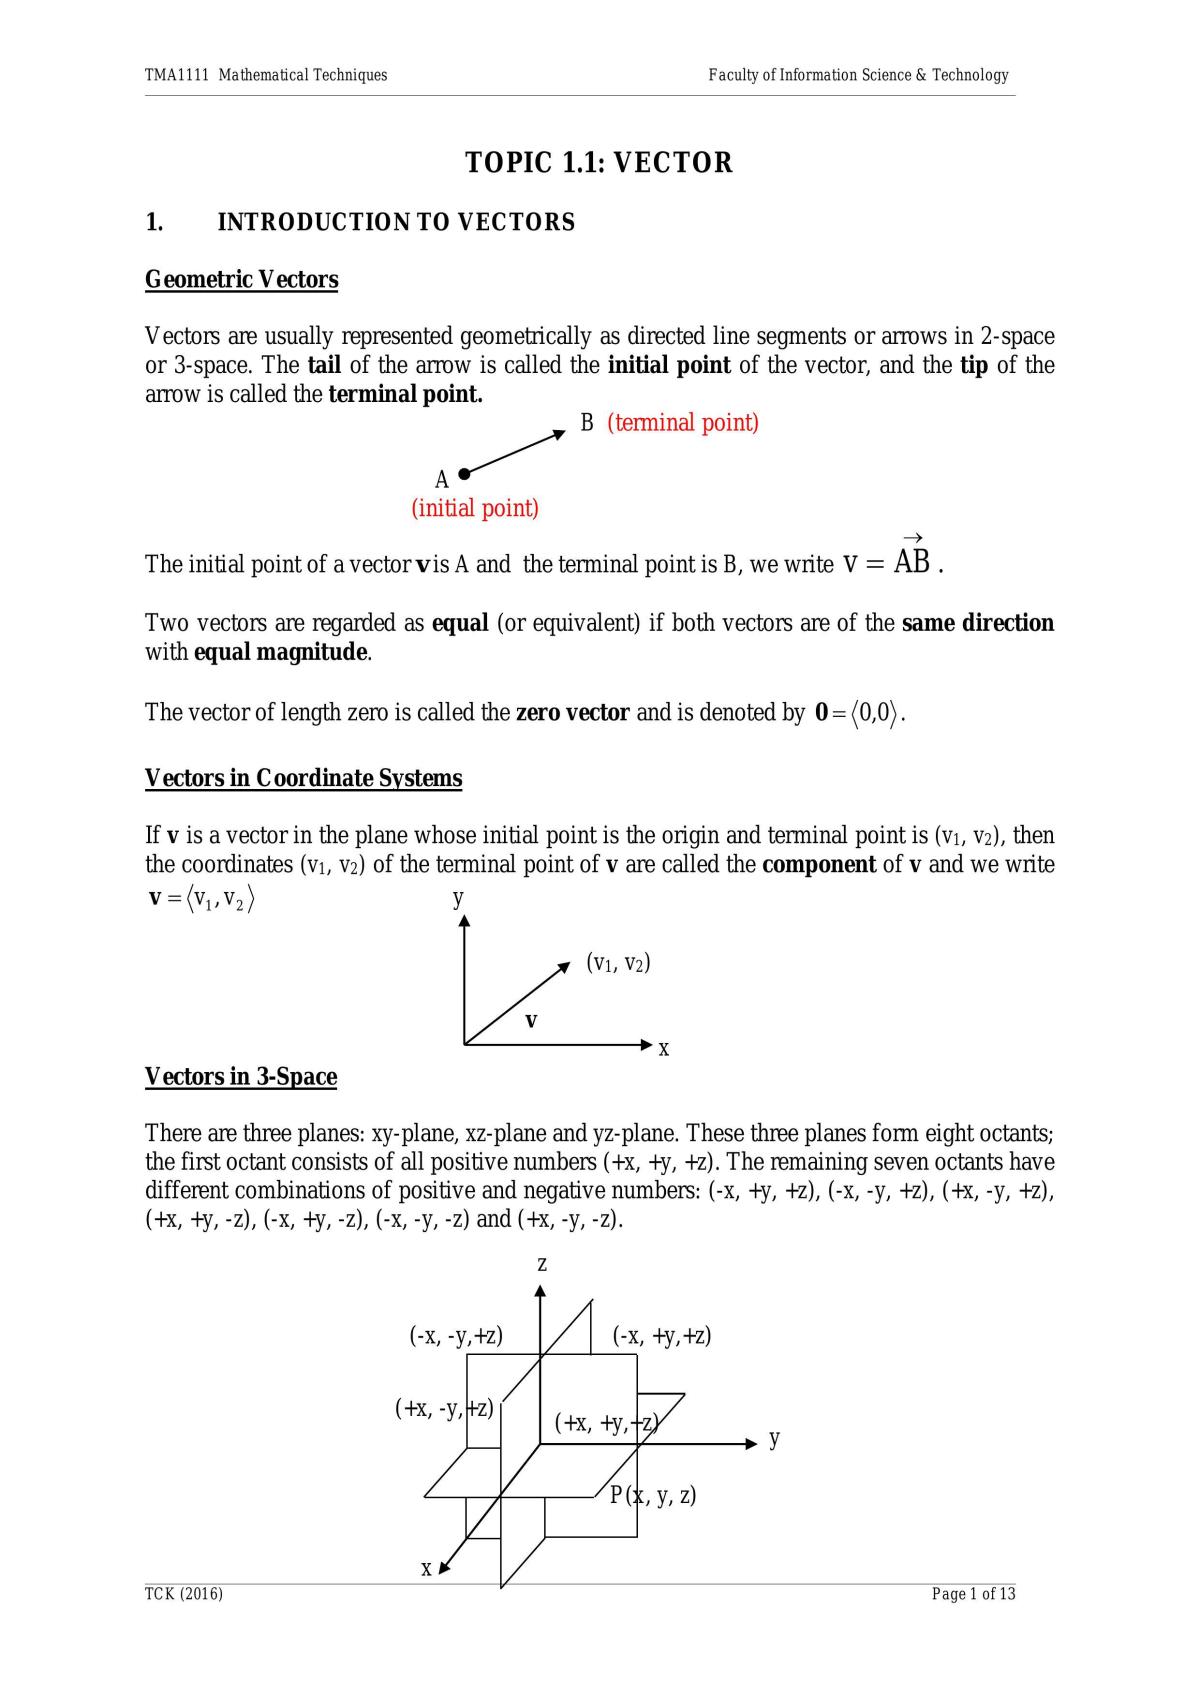 TMA1111 Mathematical Techniques Notes - Page 1